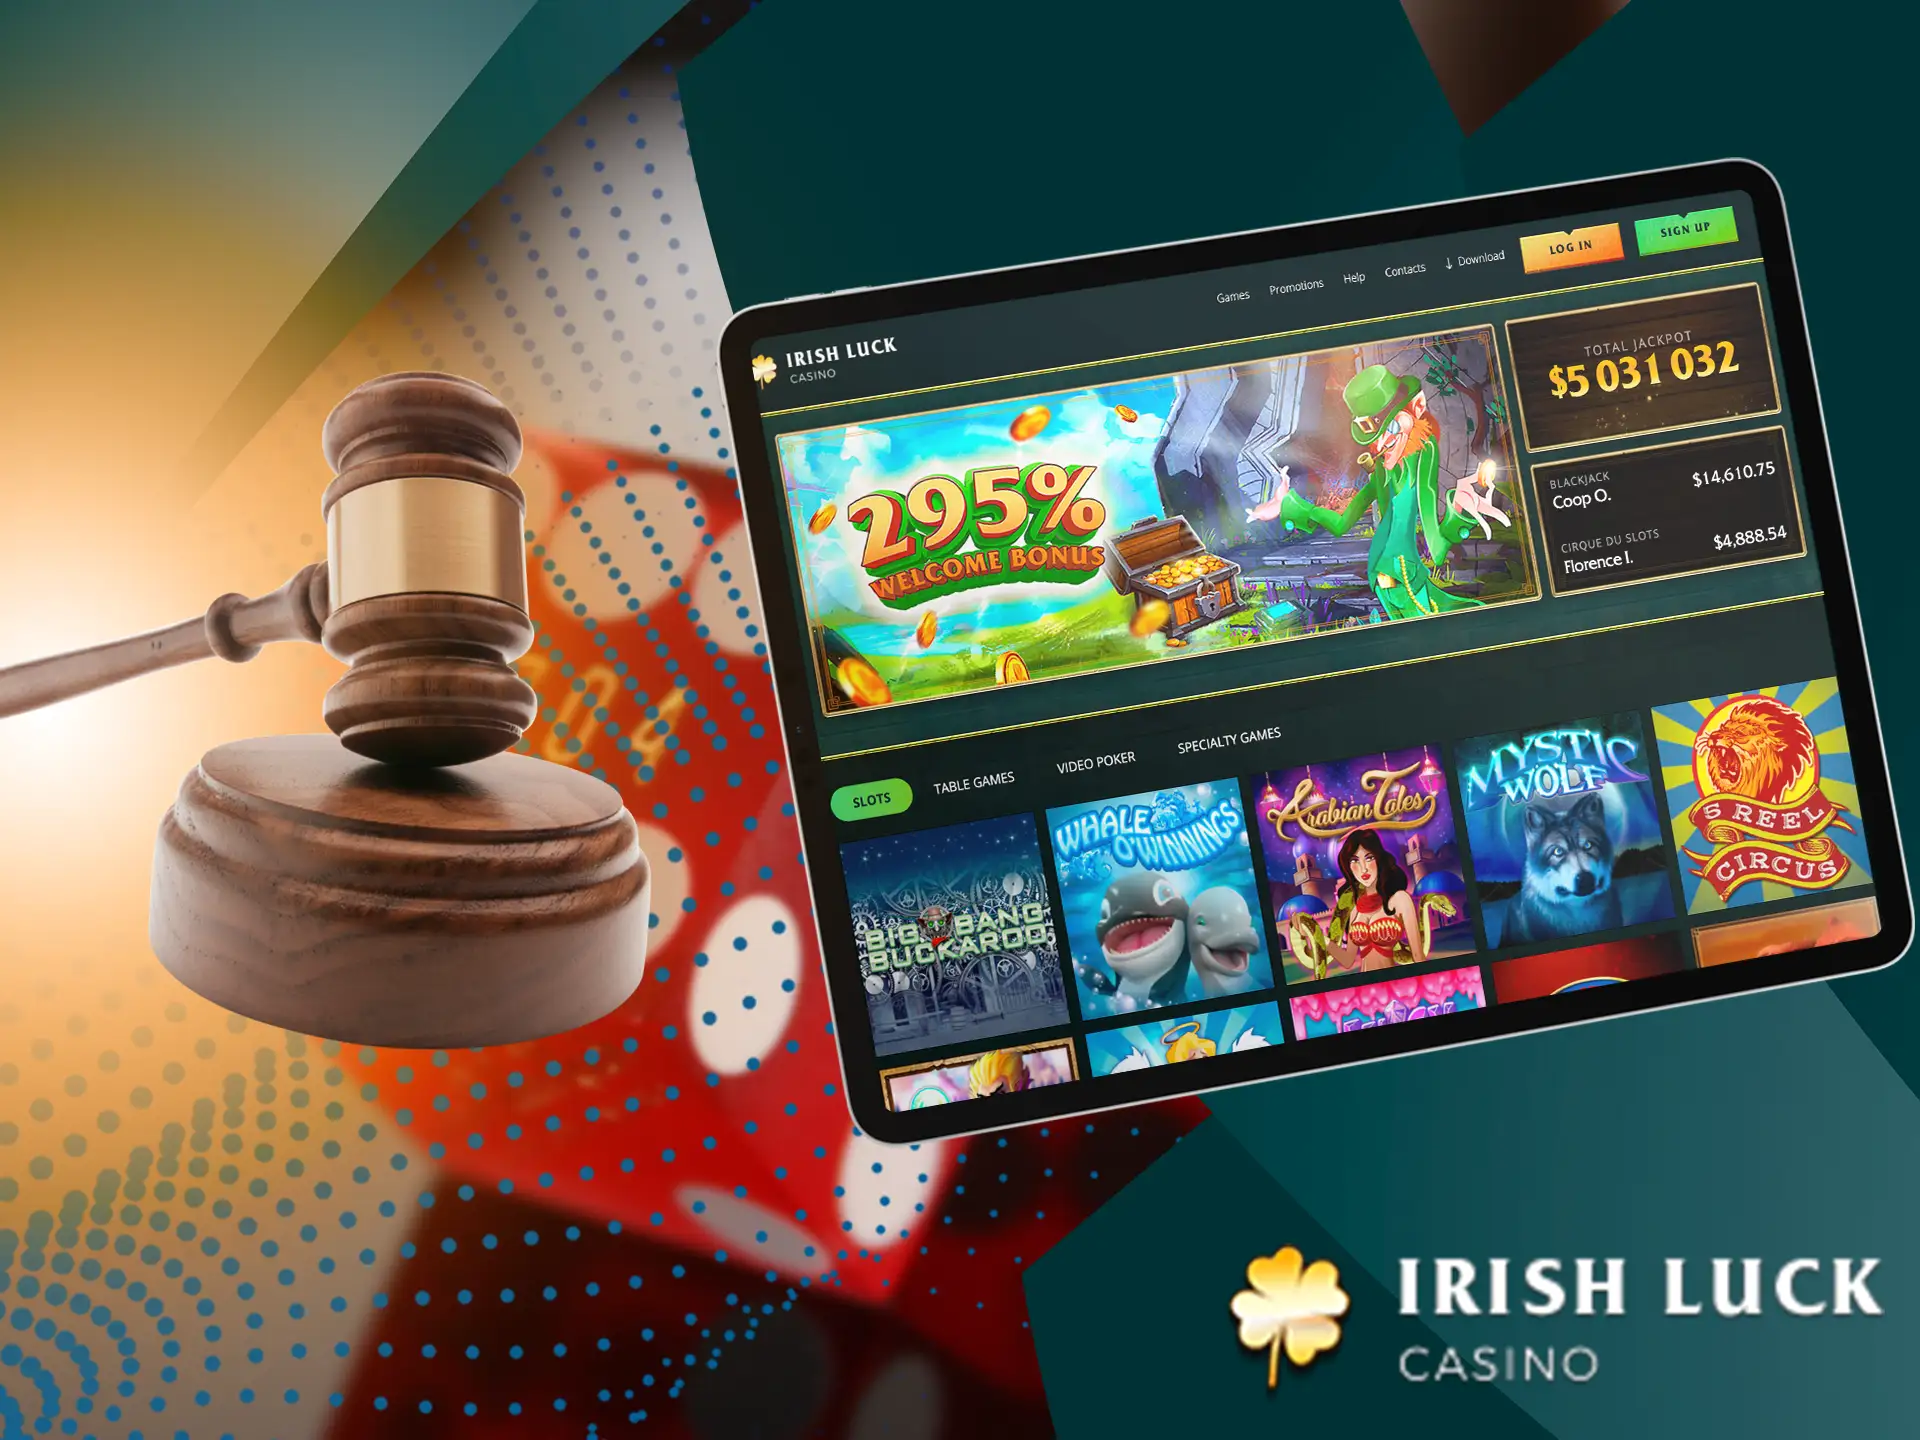 Irish Luck is completely secure, the site is compliant with the latest privacy requirements and Irish Luck is licensed.